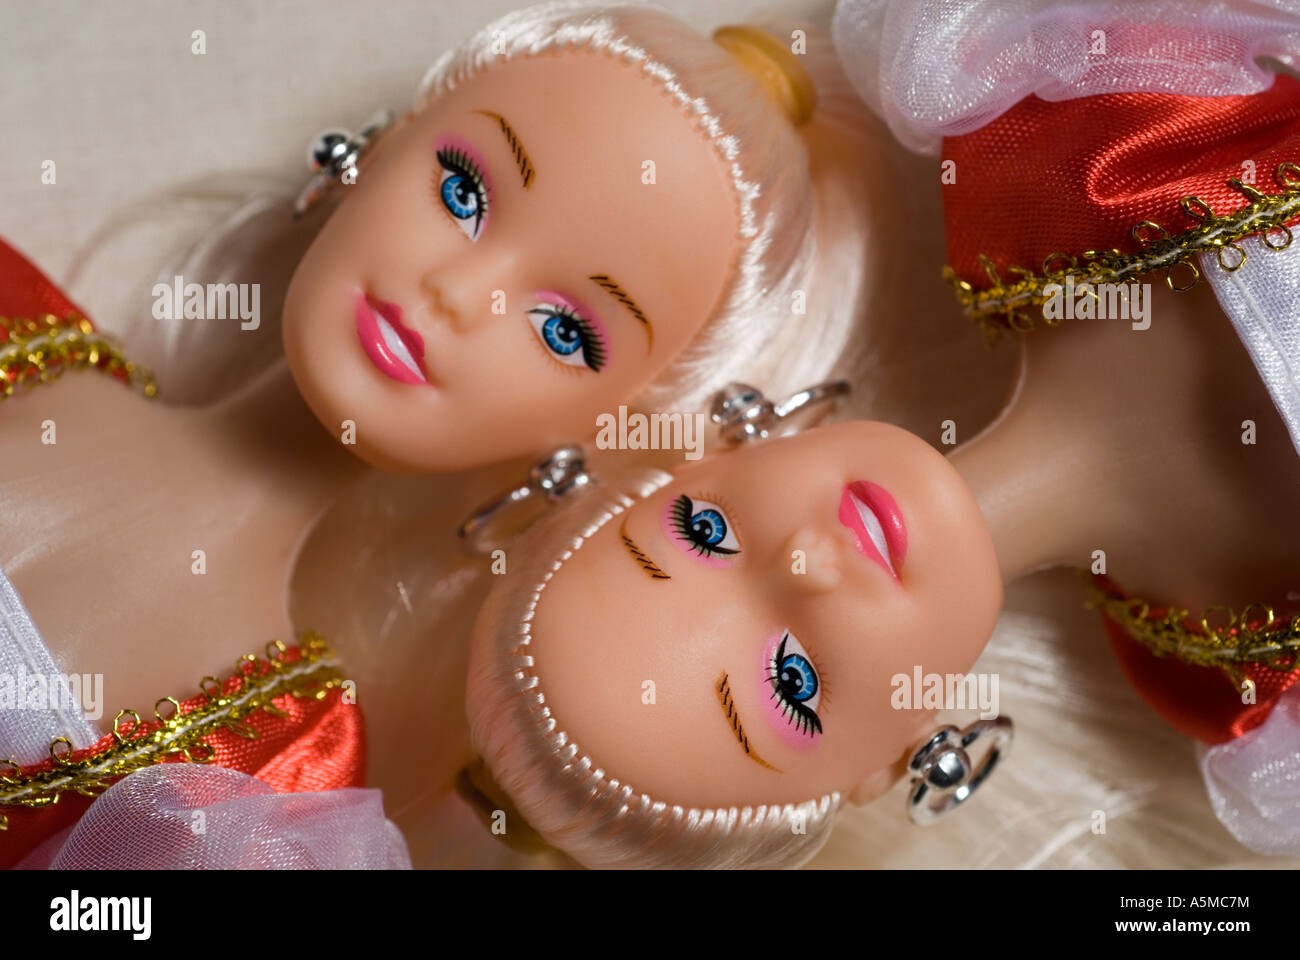 two dolls birds eye view in symetrical horozontal composition Stock Photo